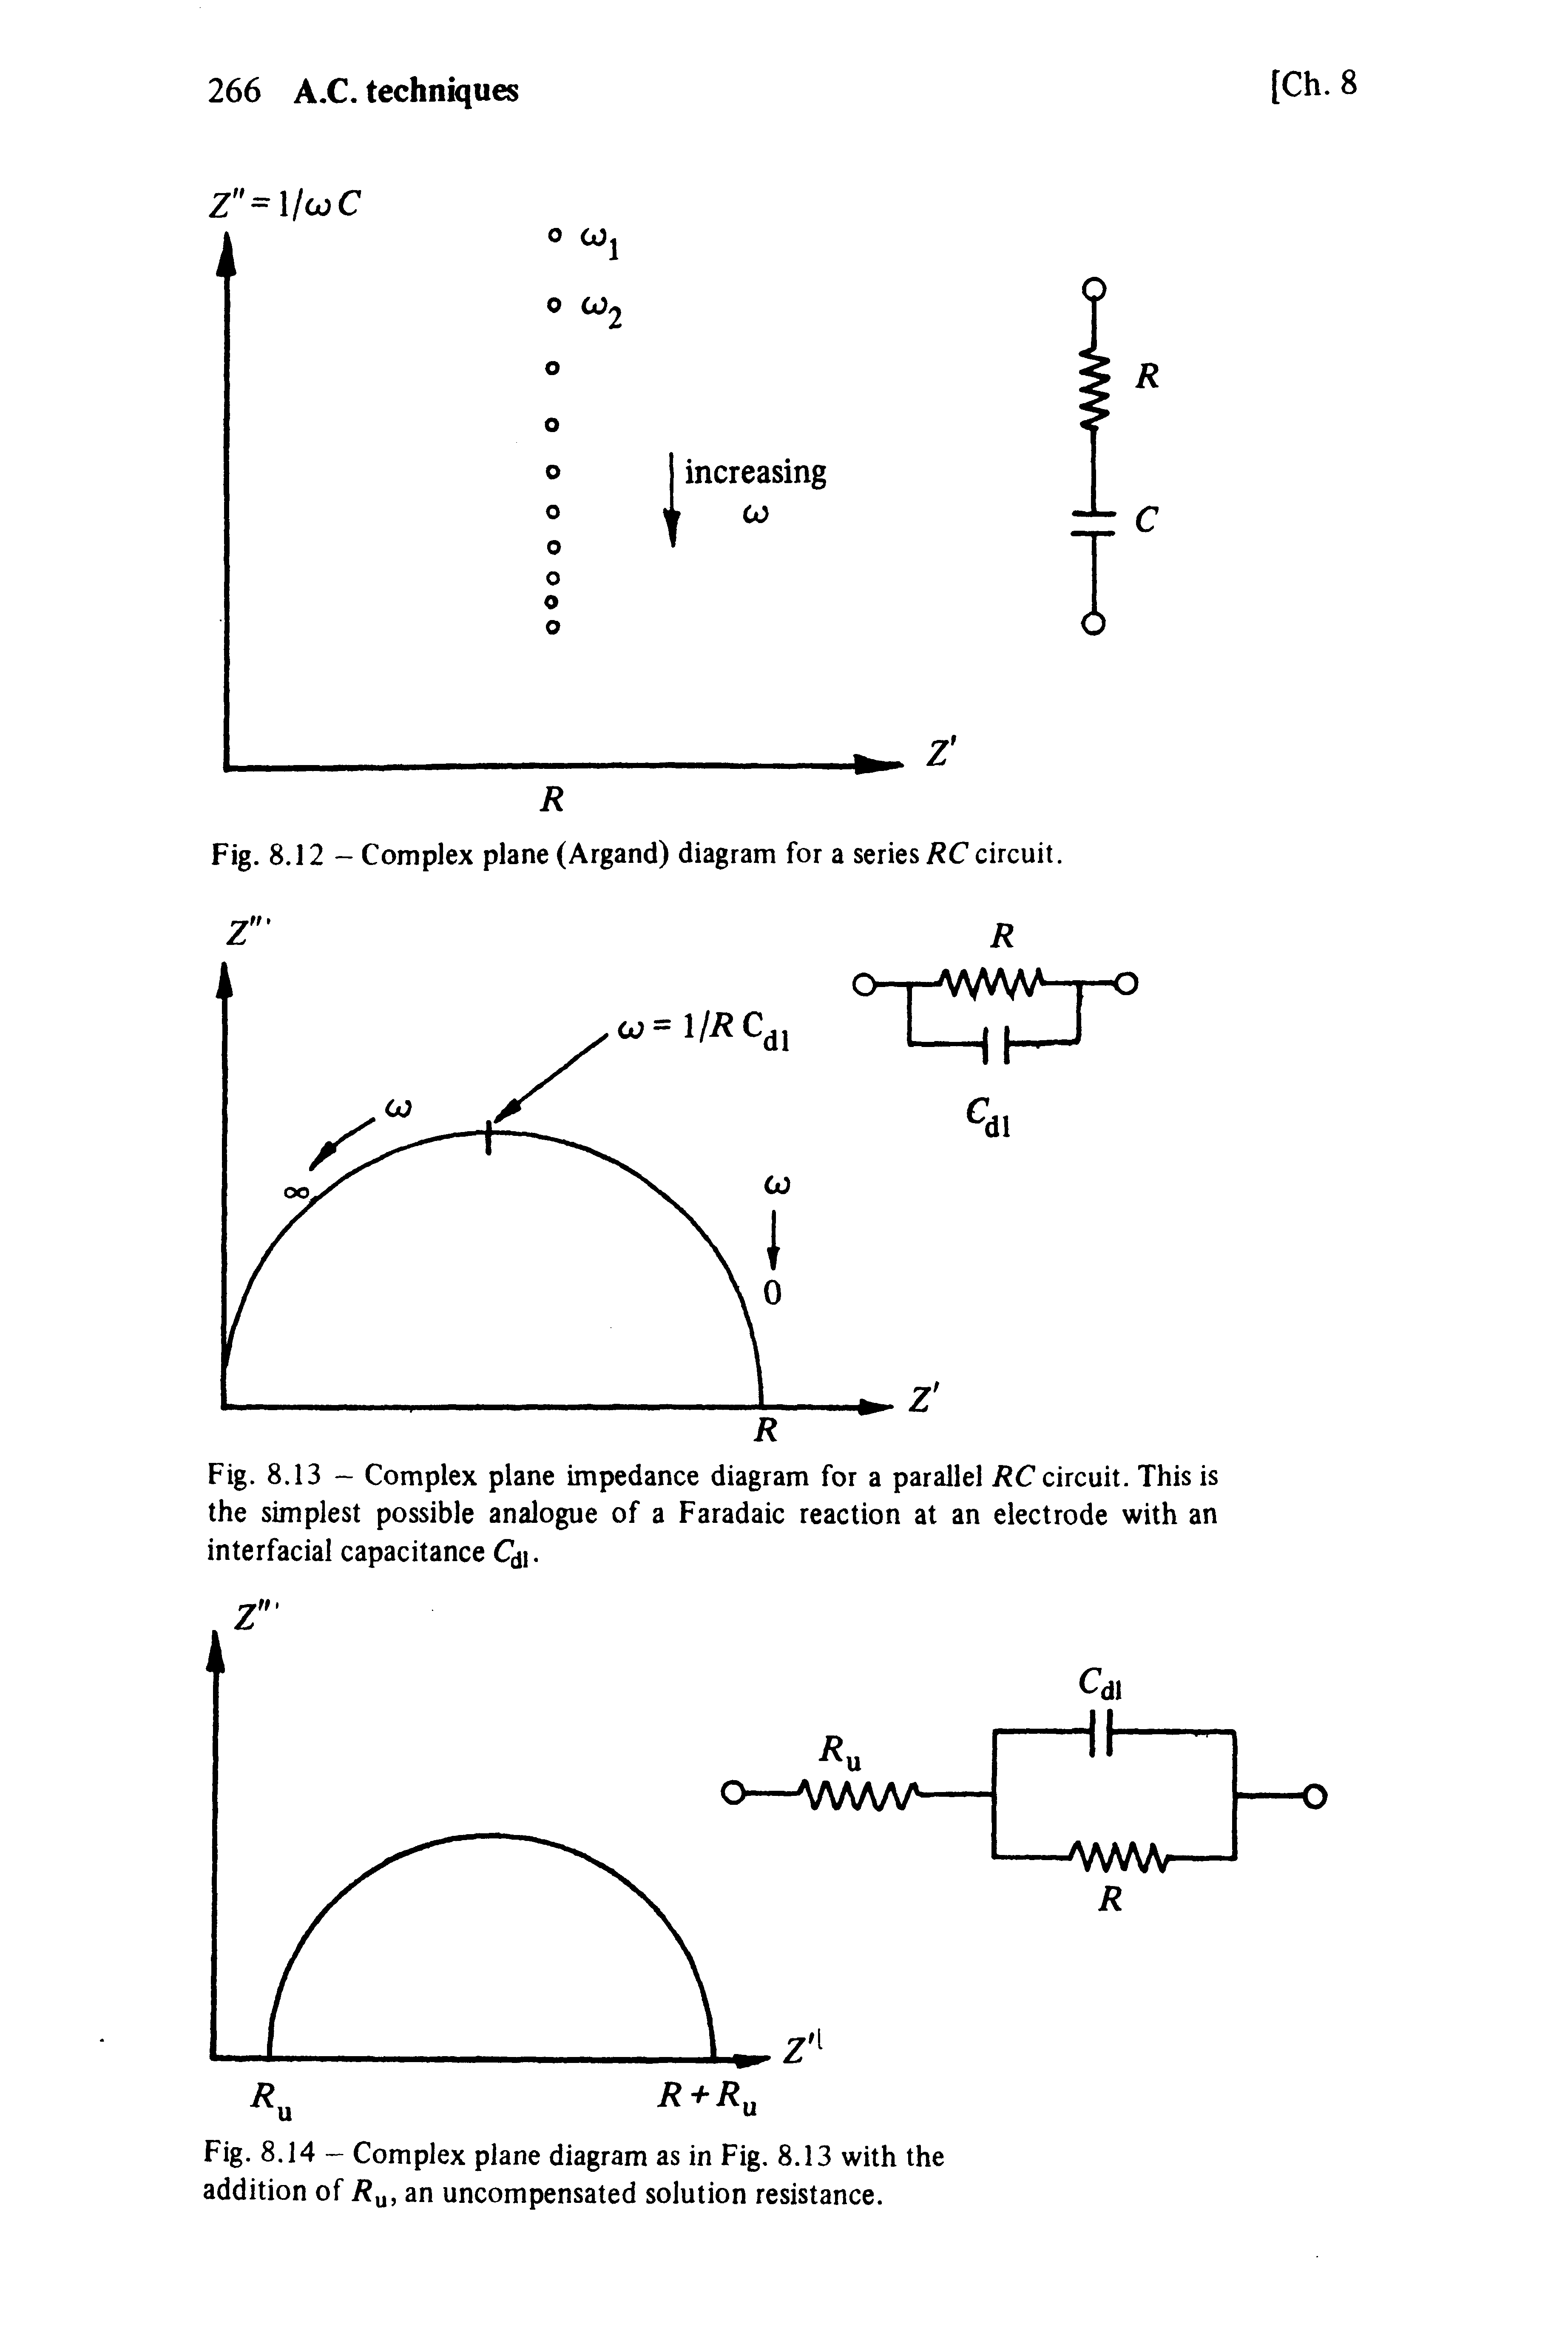 Fig. 8.13 - Complex plane impedance diagram for a parallel / C circuit. This is the simplest possible analogue of a Faradaic reaction at an electrode with an interfacial capacitance Qi.